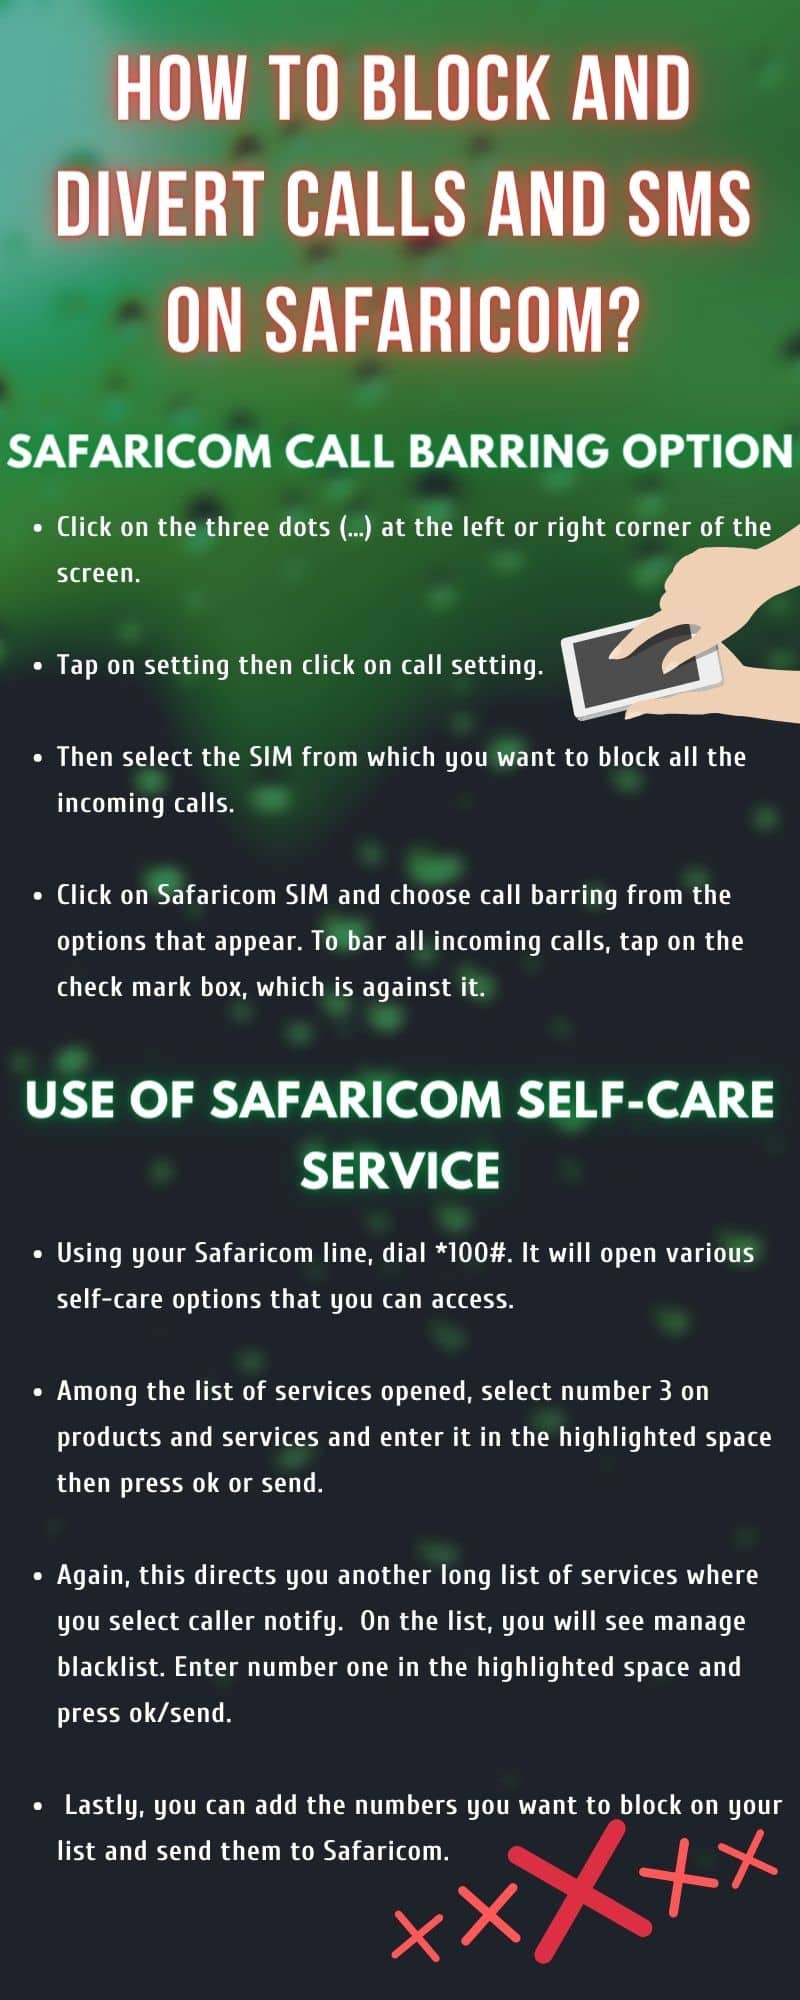 How to block and divert calls and SMS on Safaricom